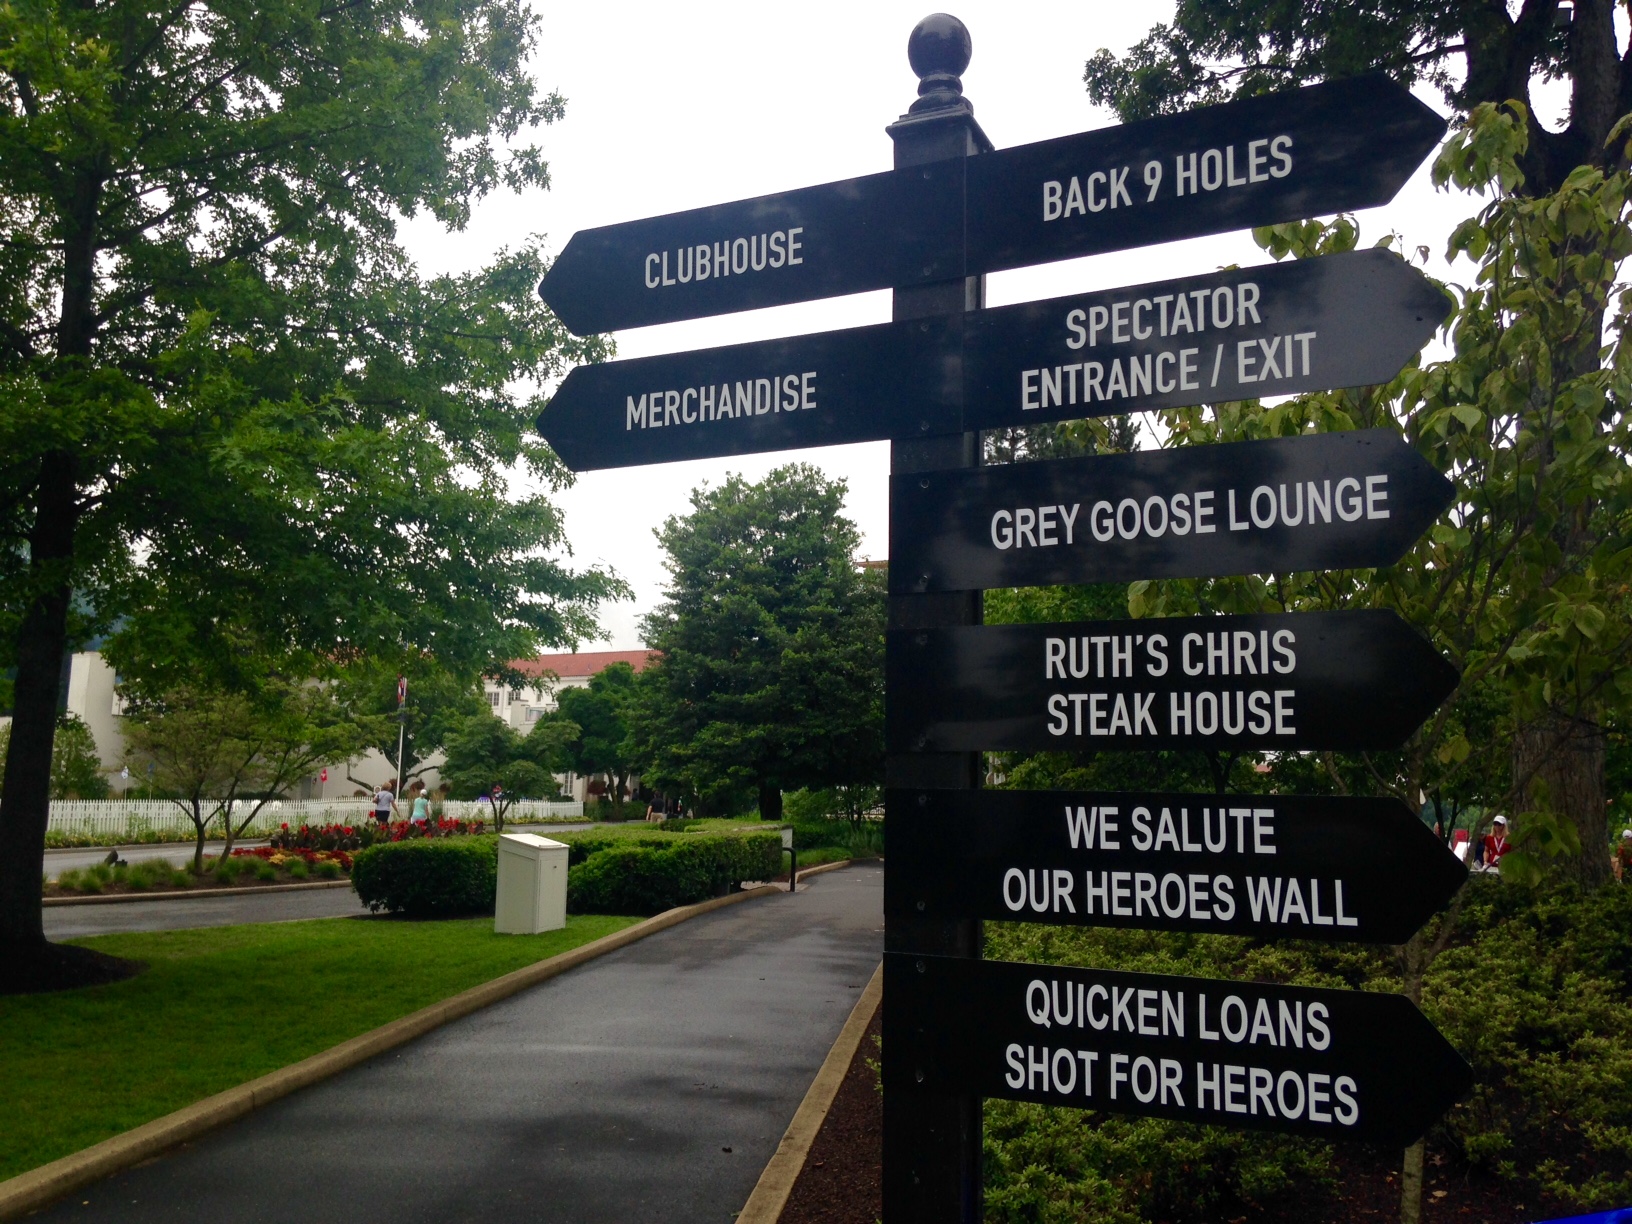 Guests are greeted by signs directing them to the merchandise, heroes wall and back 9 holes of the course. (WTOP/Megan Cloherty)